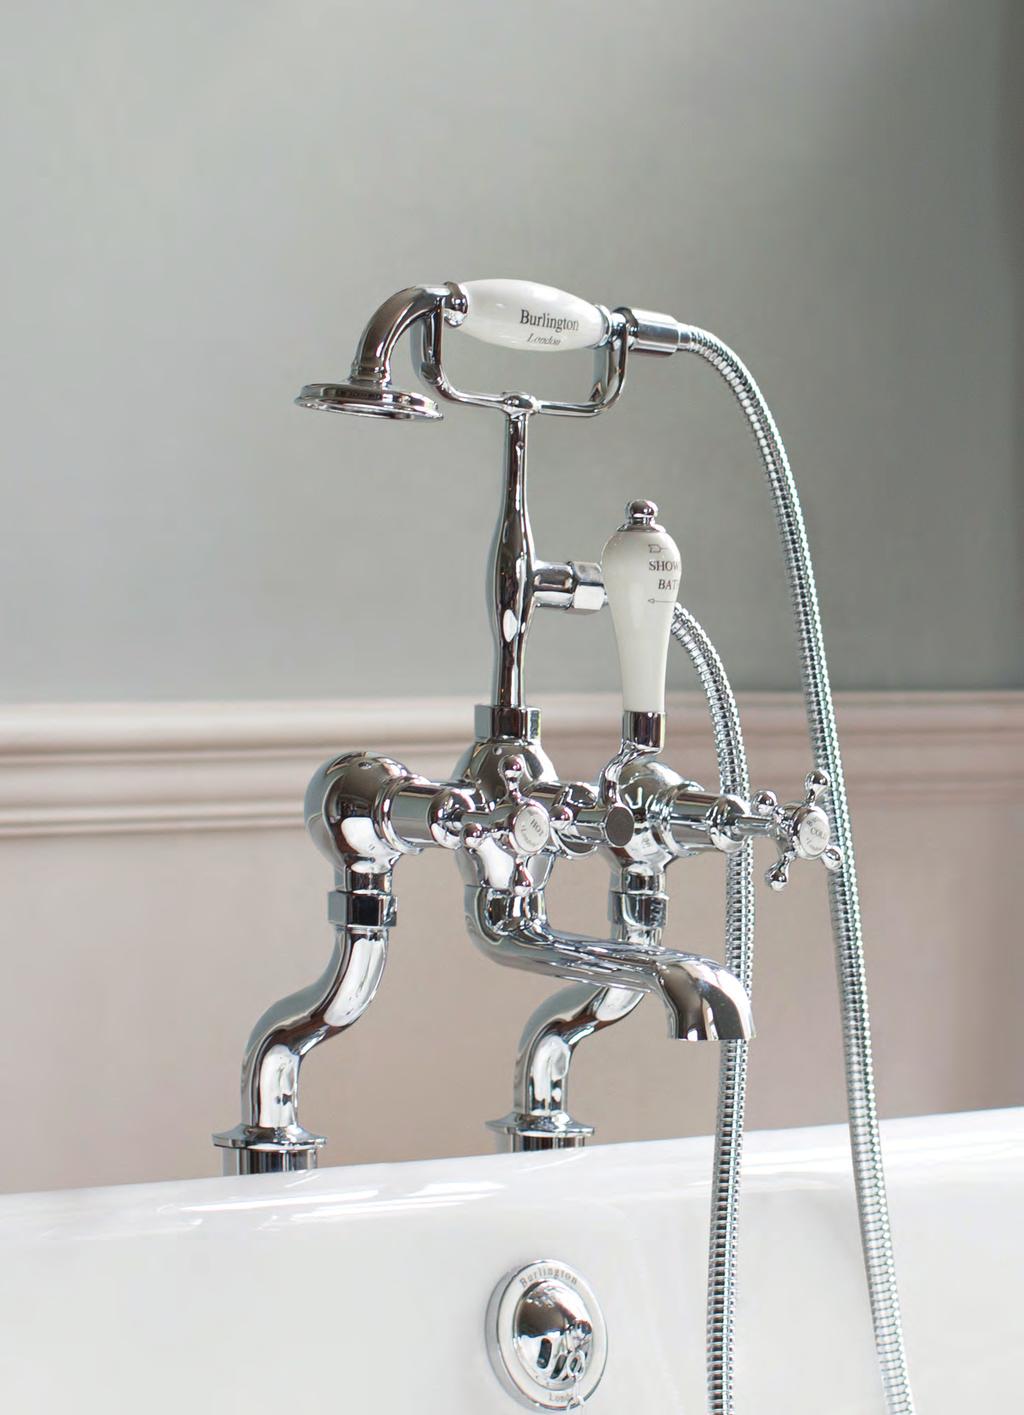 Windsor 170cm bath with luxury chrome claw feet 859 and Claremont deck-mounted angled bath shower mixer 560, decorative shrouds 249, exposed chrome waste and overflow 149, P-trap 44 and P-trap